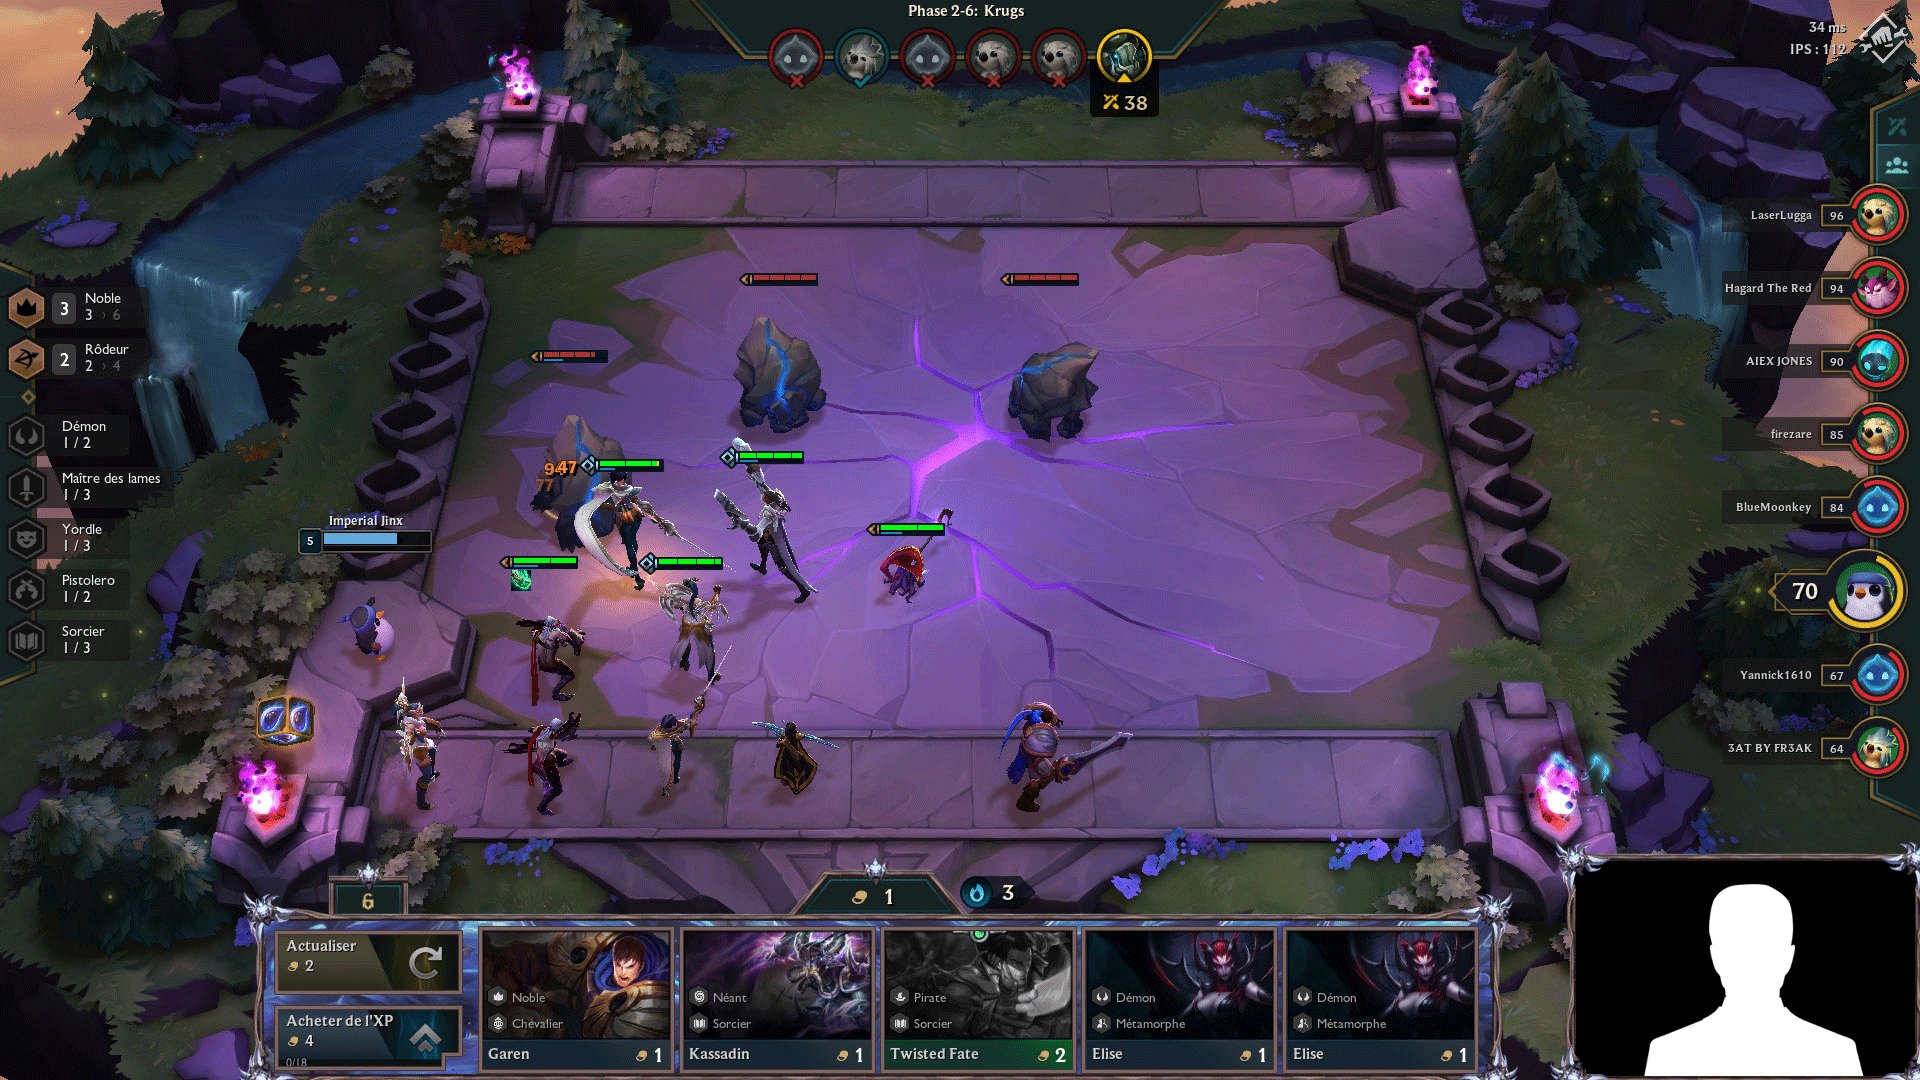 are OVERLAYS allowed in TFT?